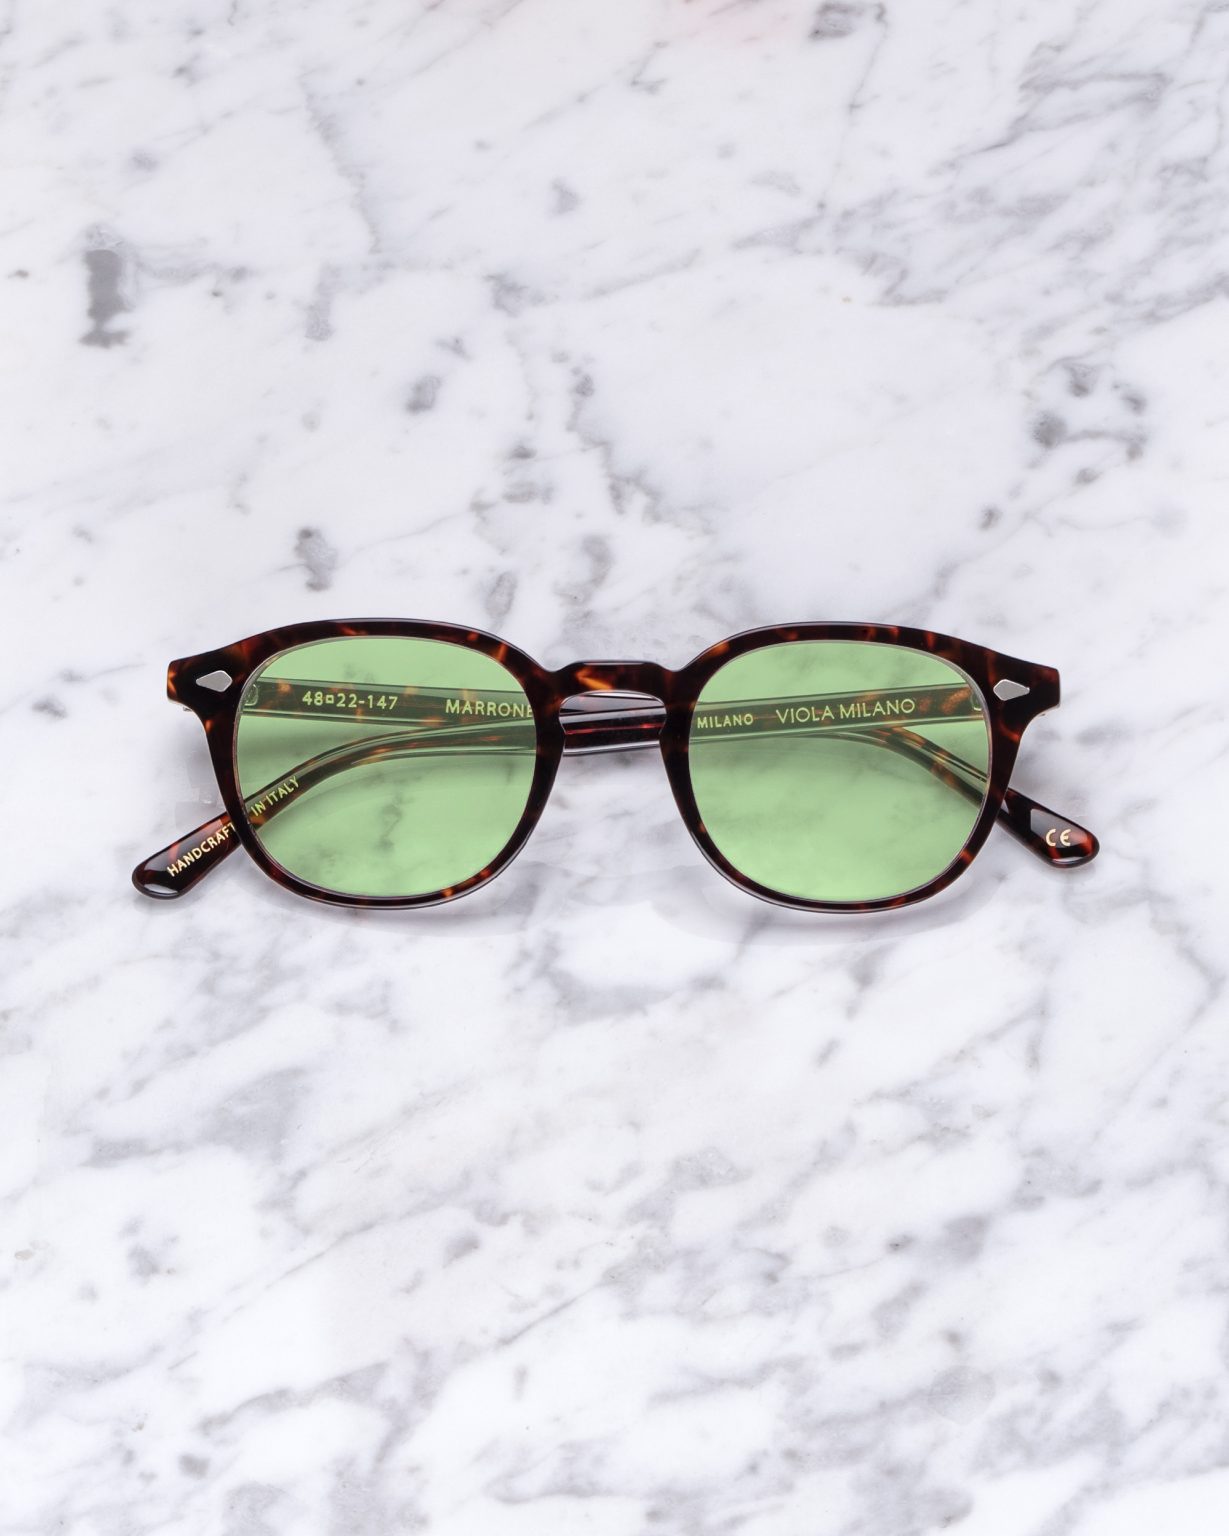 The Milano Sunglasses - Brown with Light Green lens